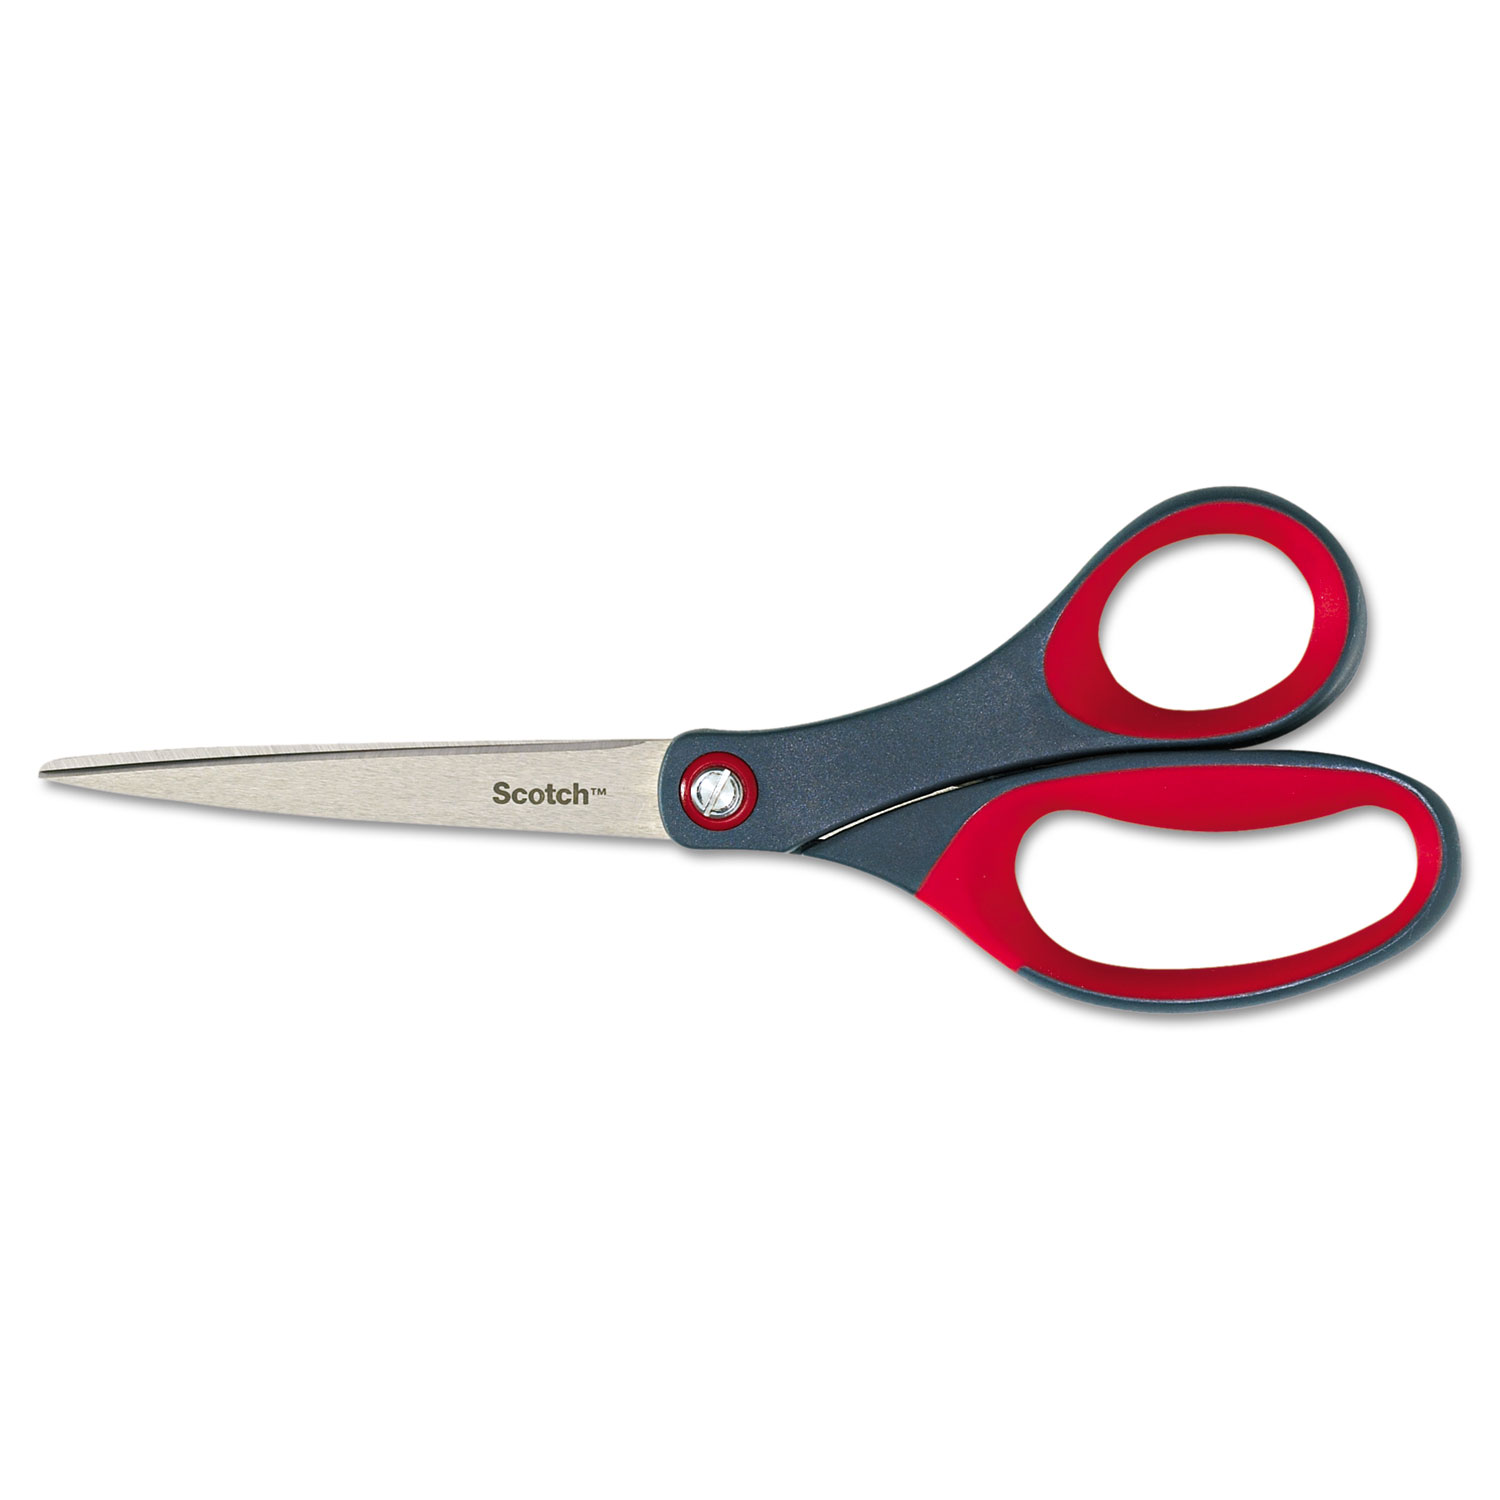 We R Makers - Comfort Craft Tools Collection - Soft Grip Scissors - 8 Inch  Blades